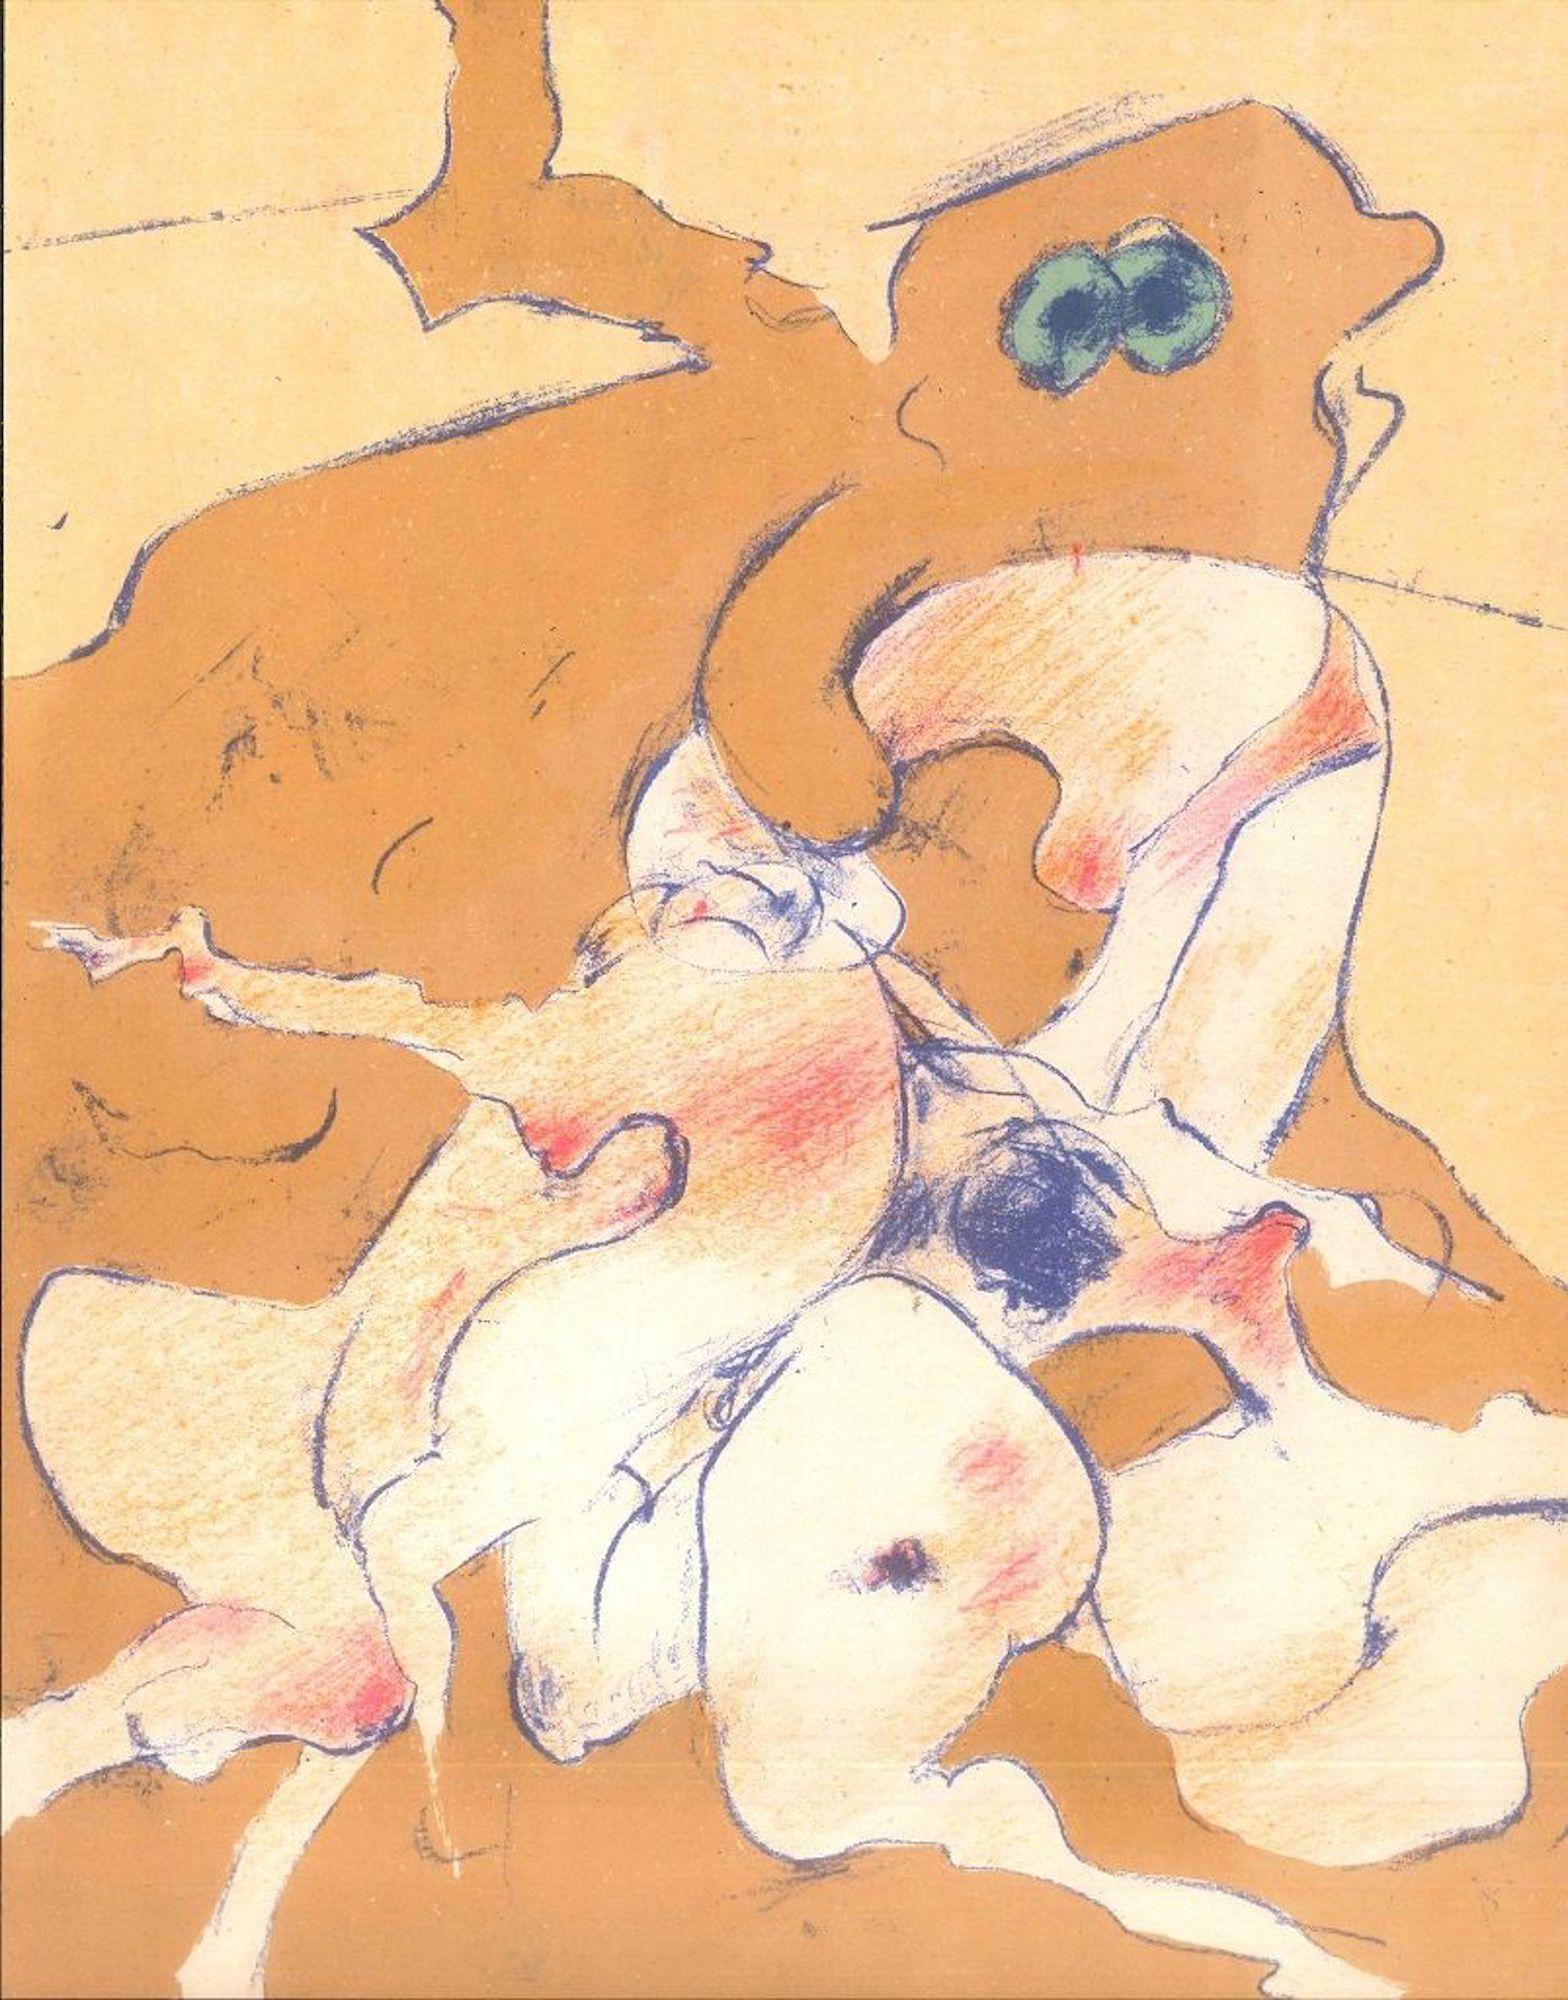 Untitled is an artwork realized by Dorothea Tanning in 1974 for the Art Magazine "XXeme Siècle".

Colored lithograph.

Very Good condition. Printed by Atelier Pierre Chave in Vence, France.

This lithograph was realized by the artist in 1974 for